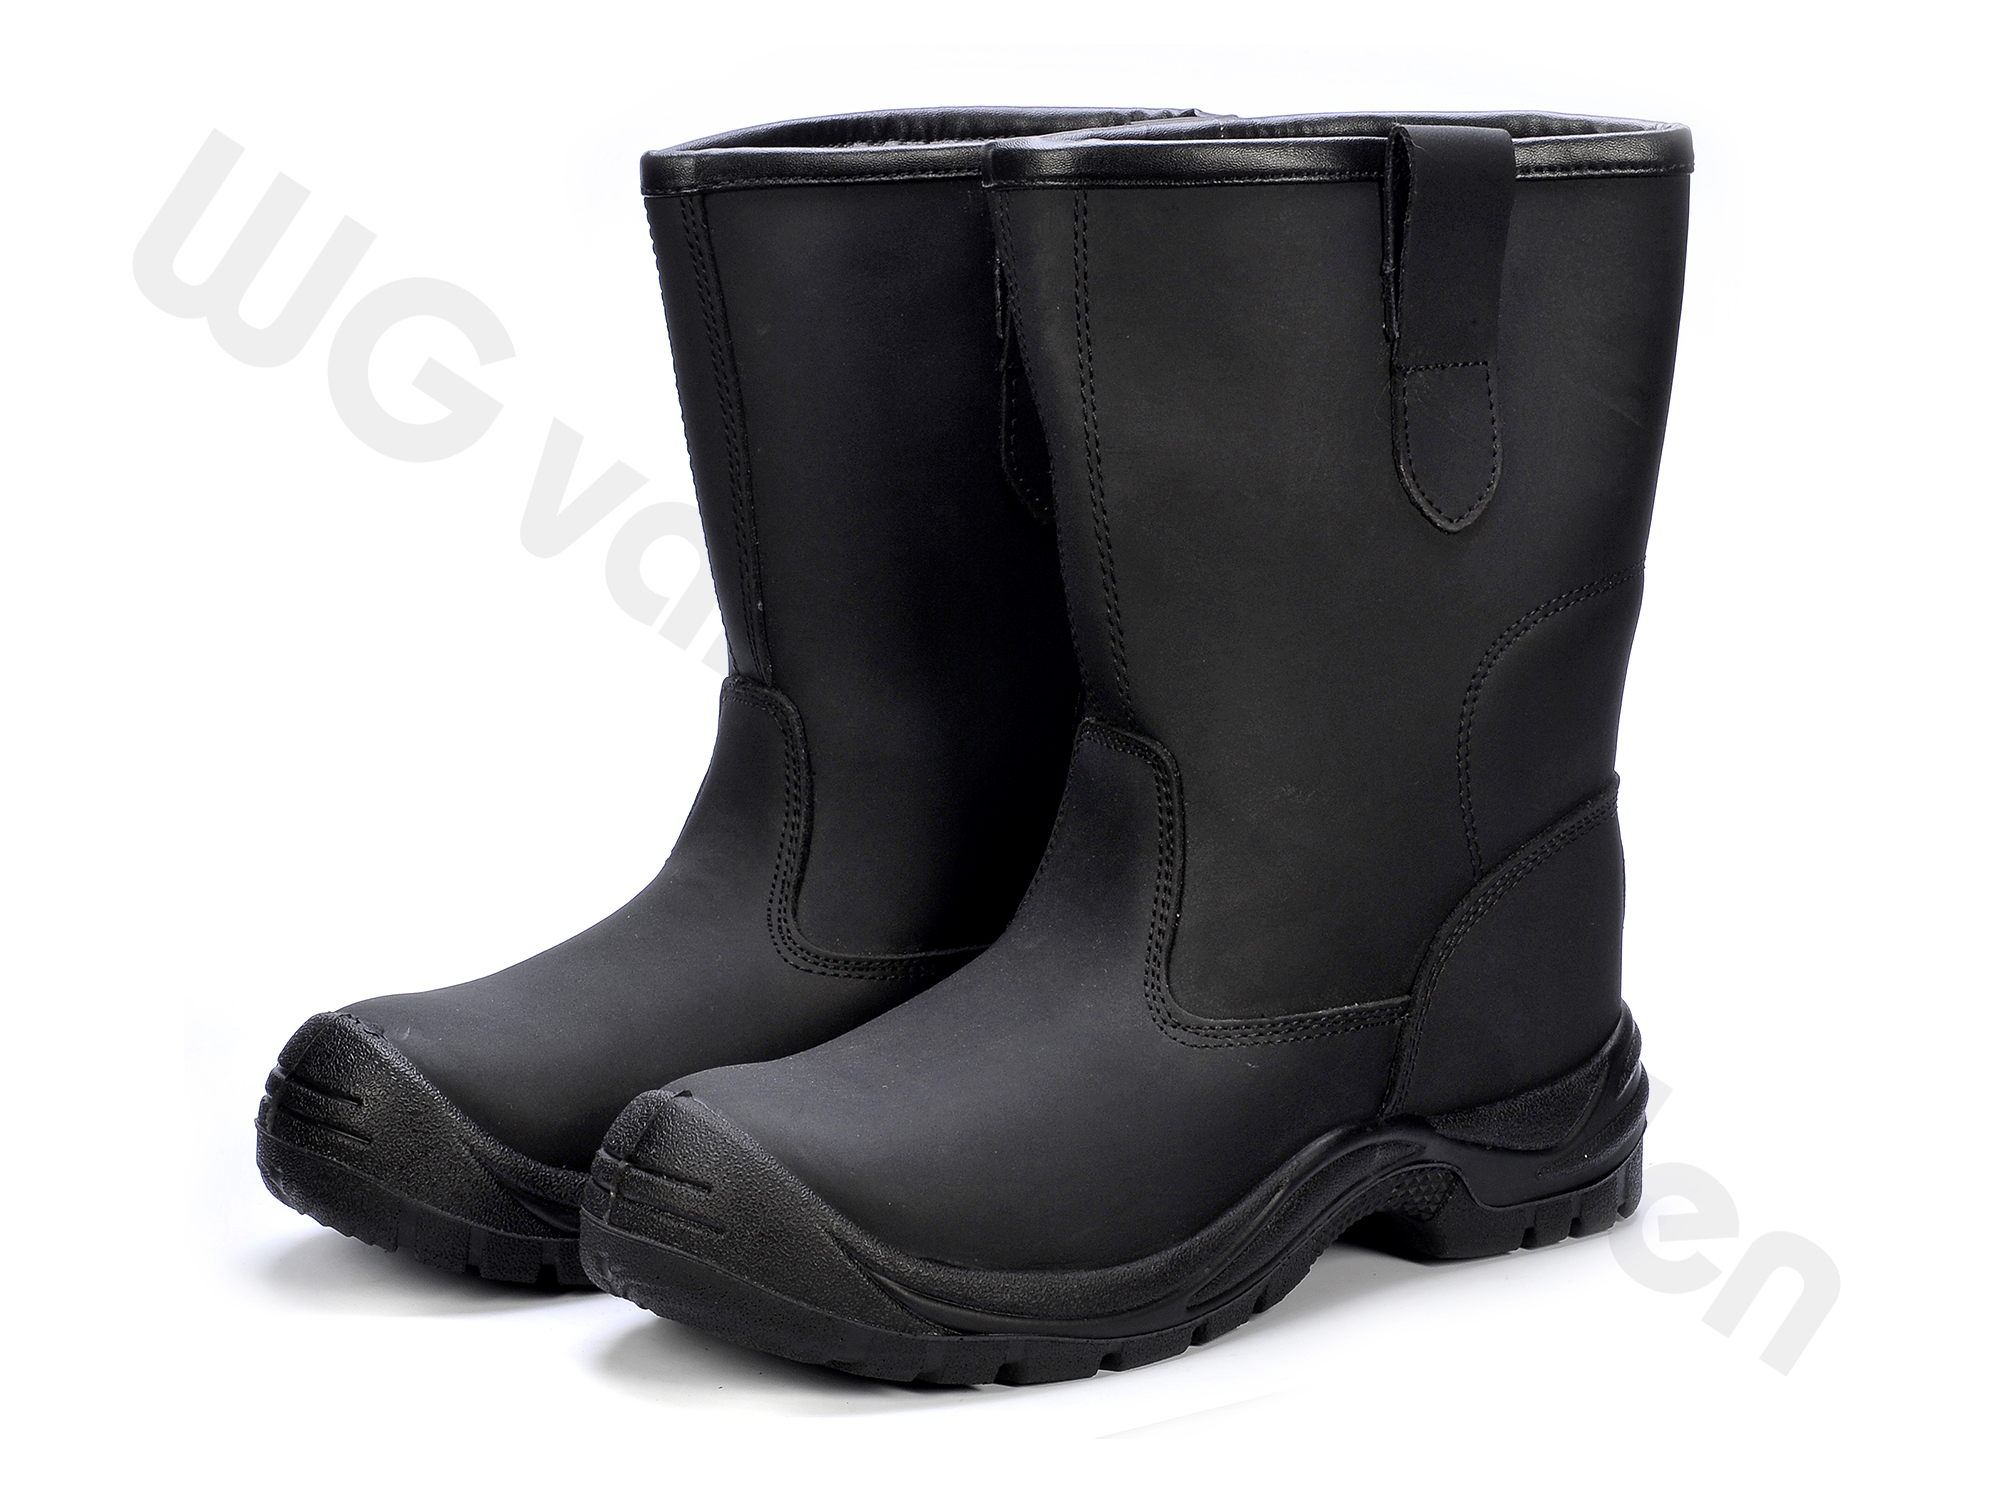 880352 BOOTS SAFETY S3 LEATHER W/STEEL TOE AND LINING 41/26.5CM